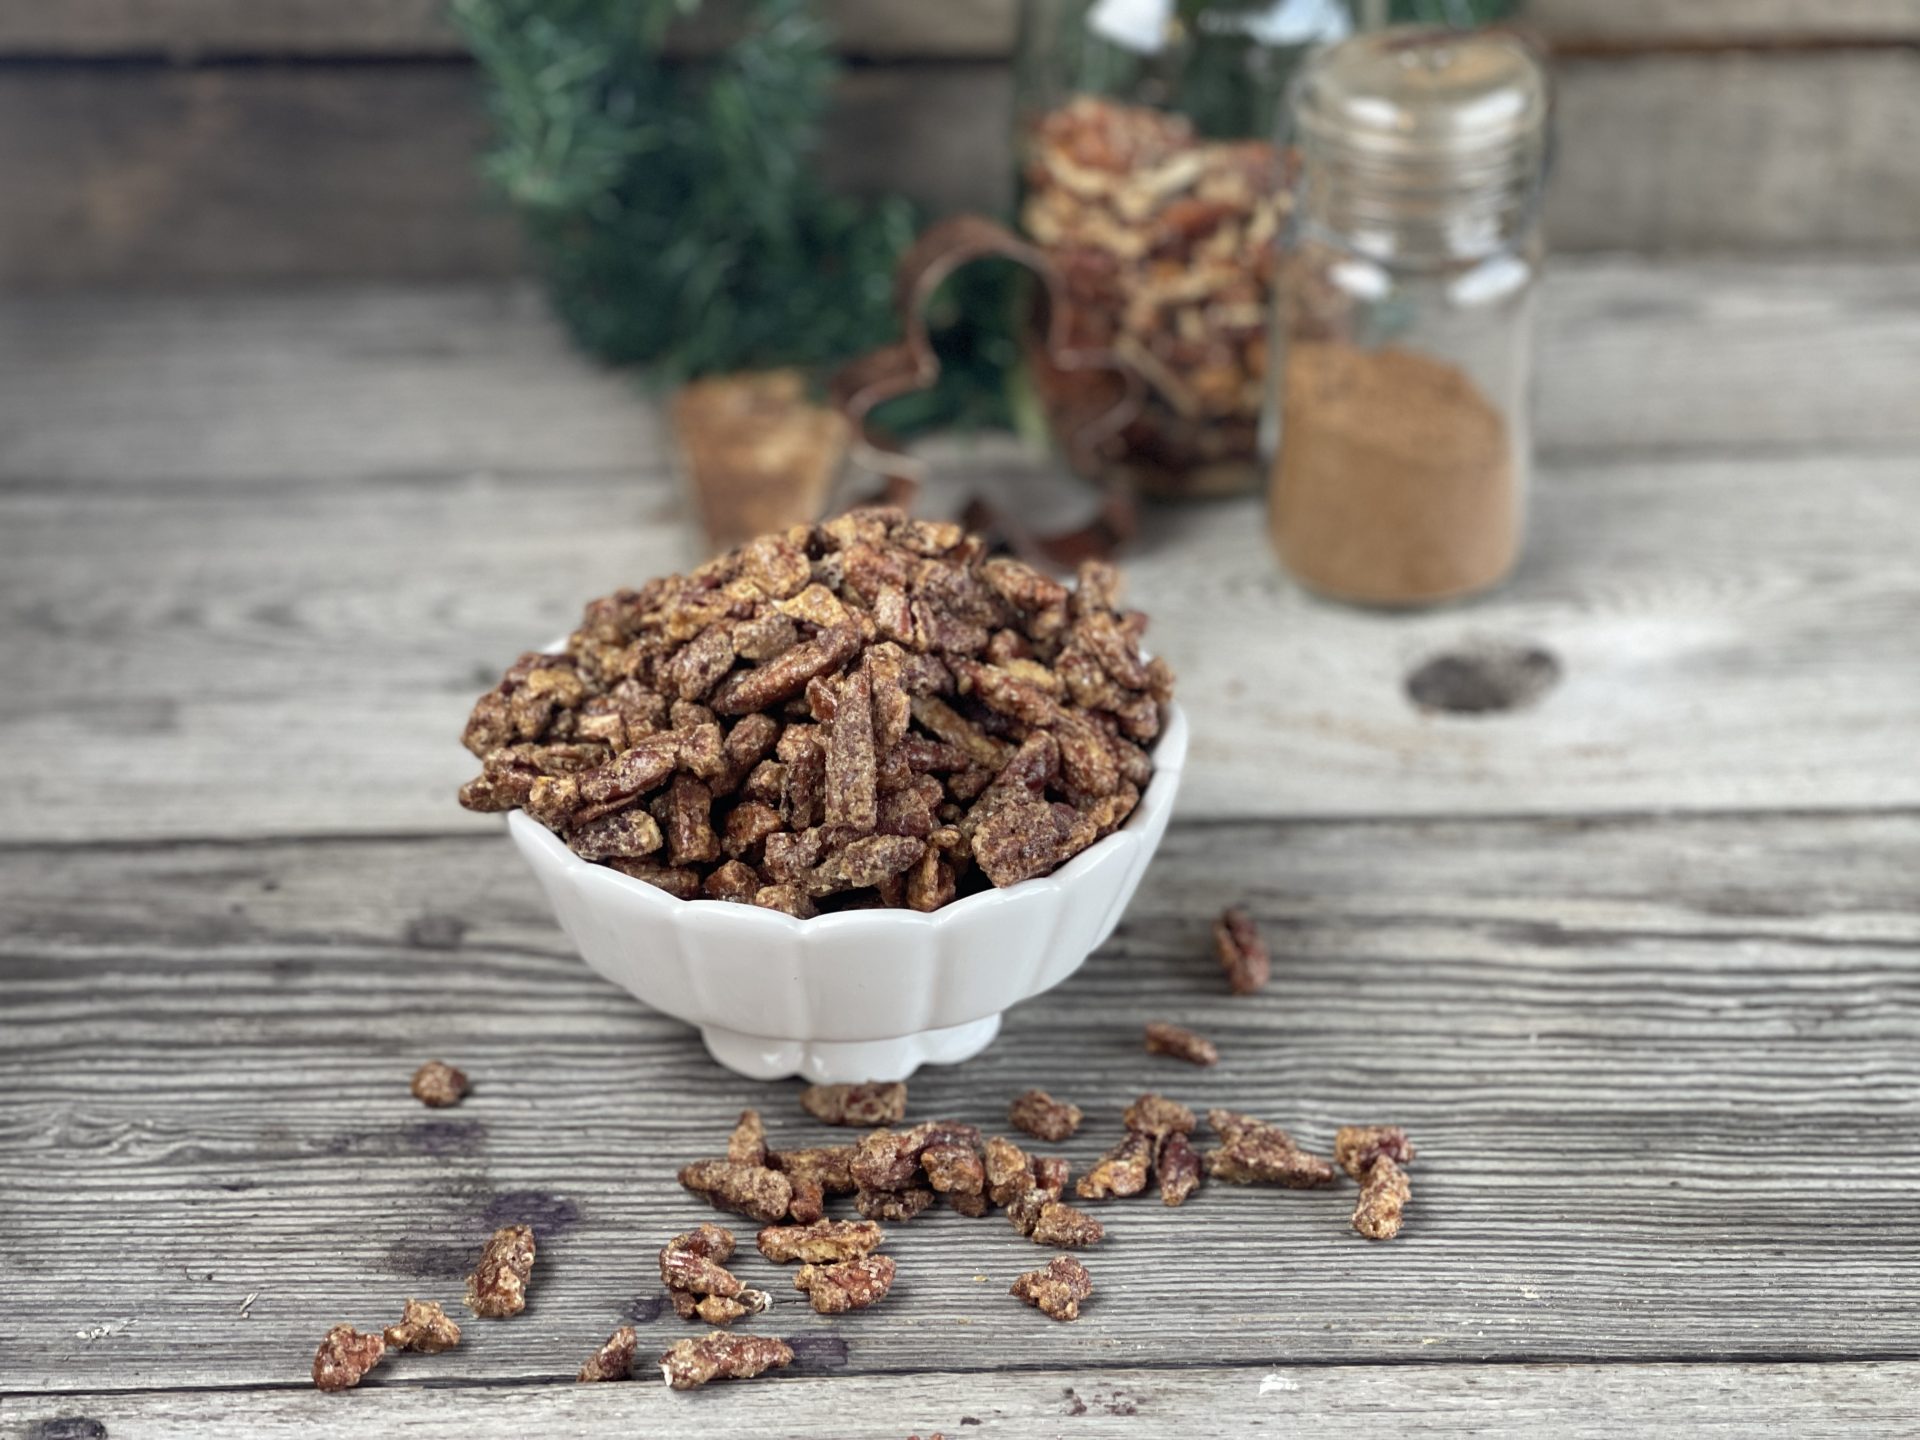 Gingerbread Candied Pecans from Farmwife Feeds are a deliciously festive treat to put out at holiday parties or give to neighbors and friends. #pecans #gingerbread #christmastreat